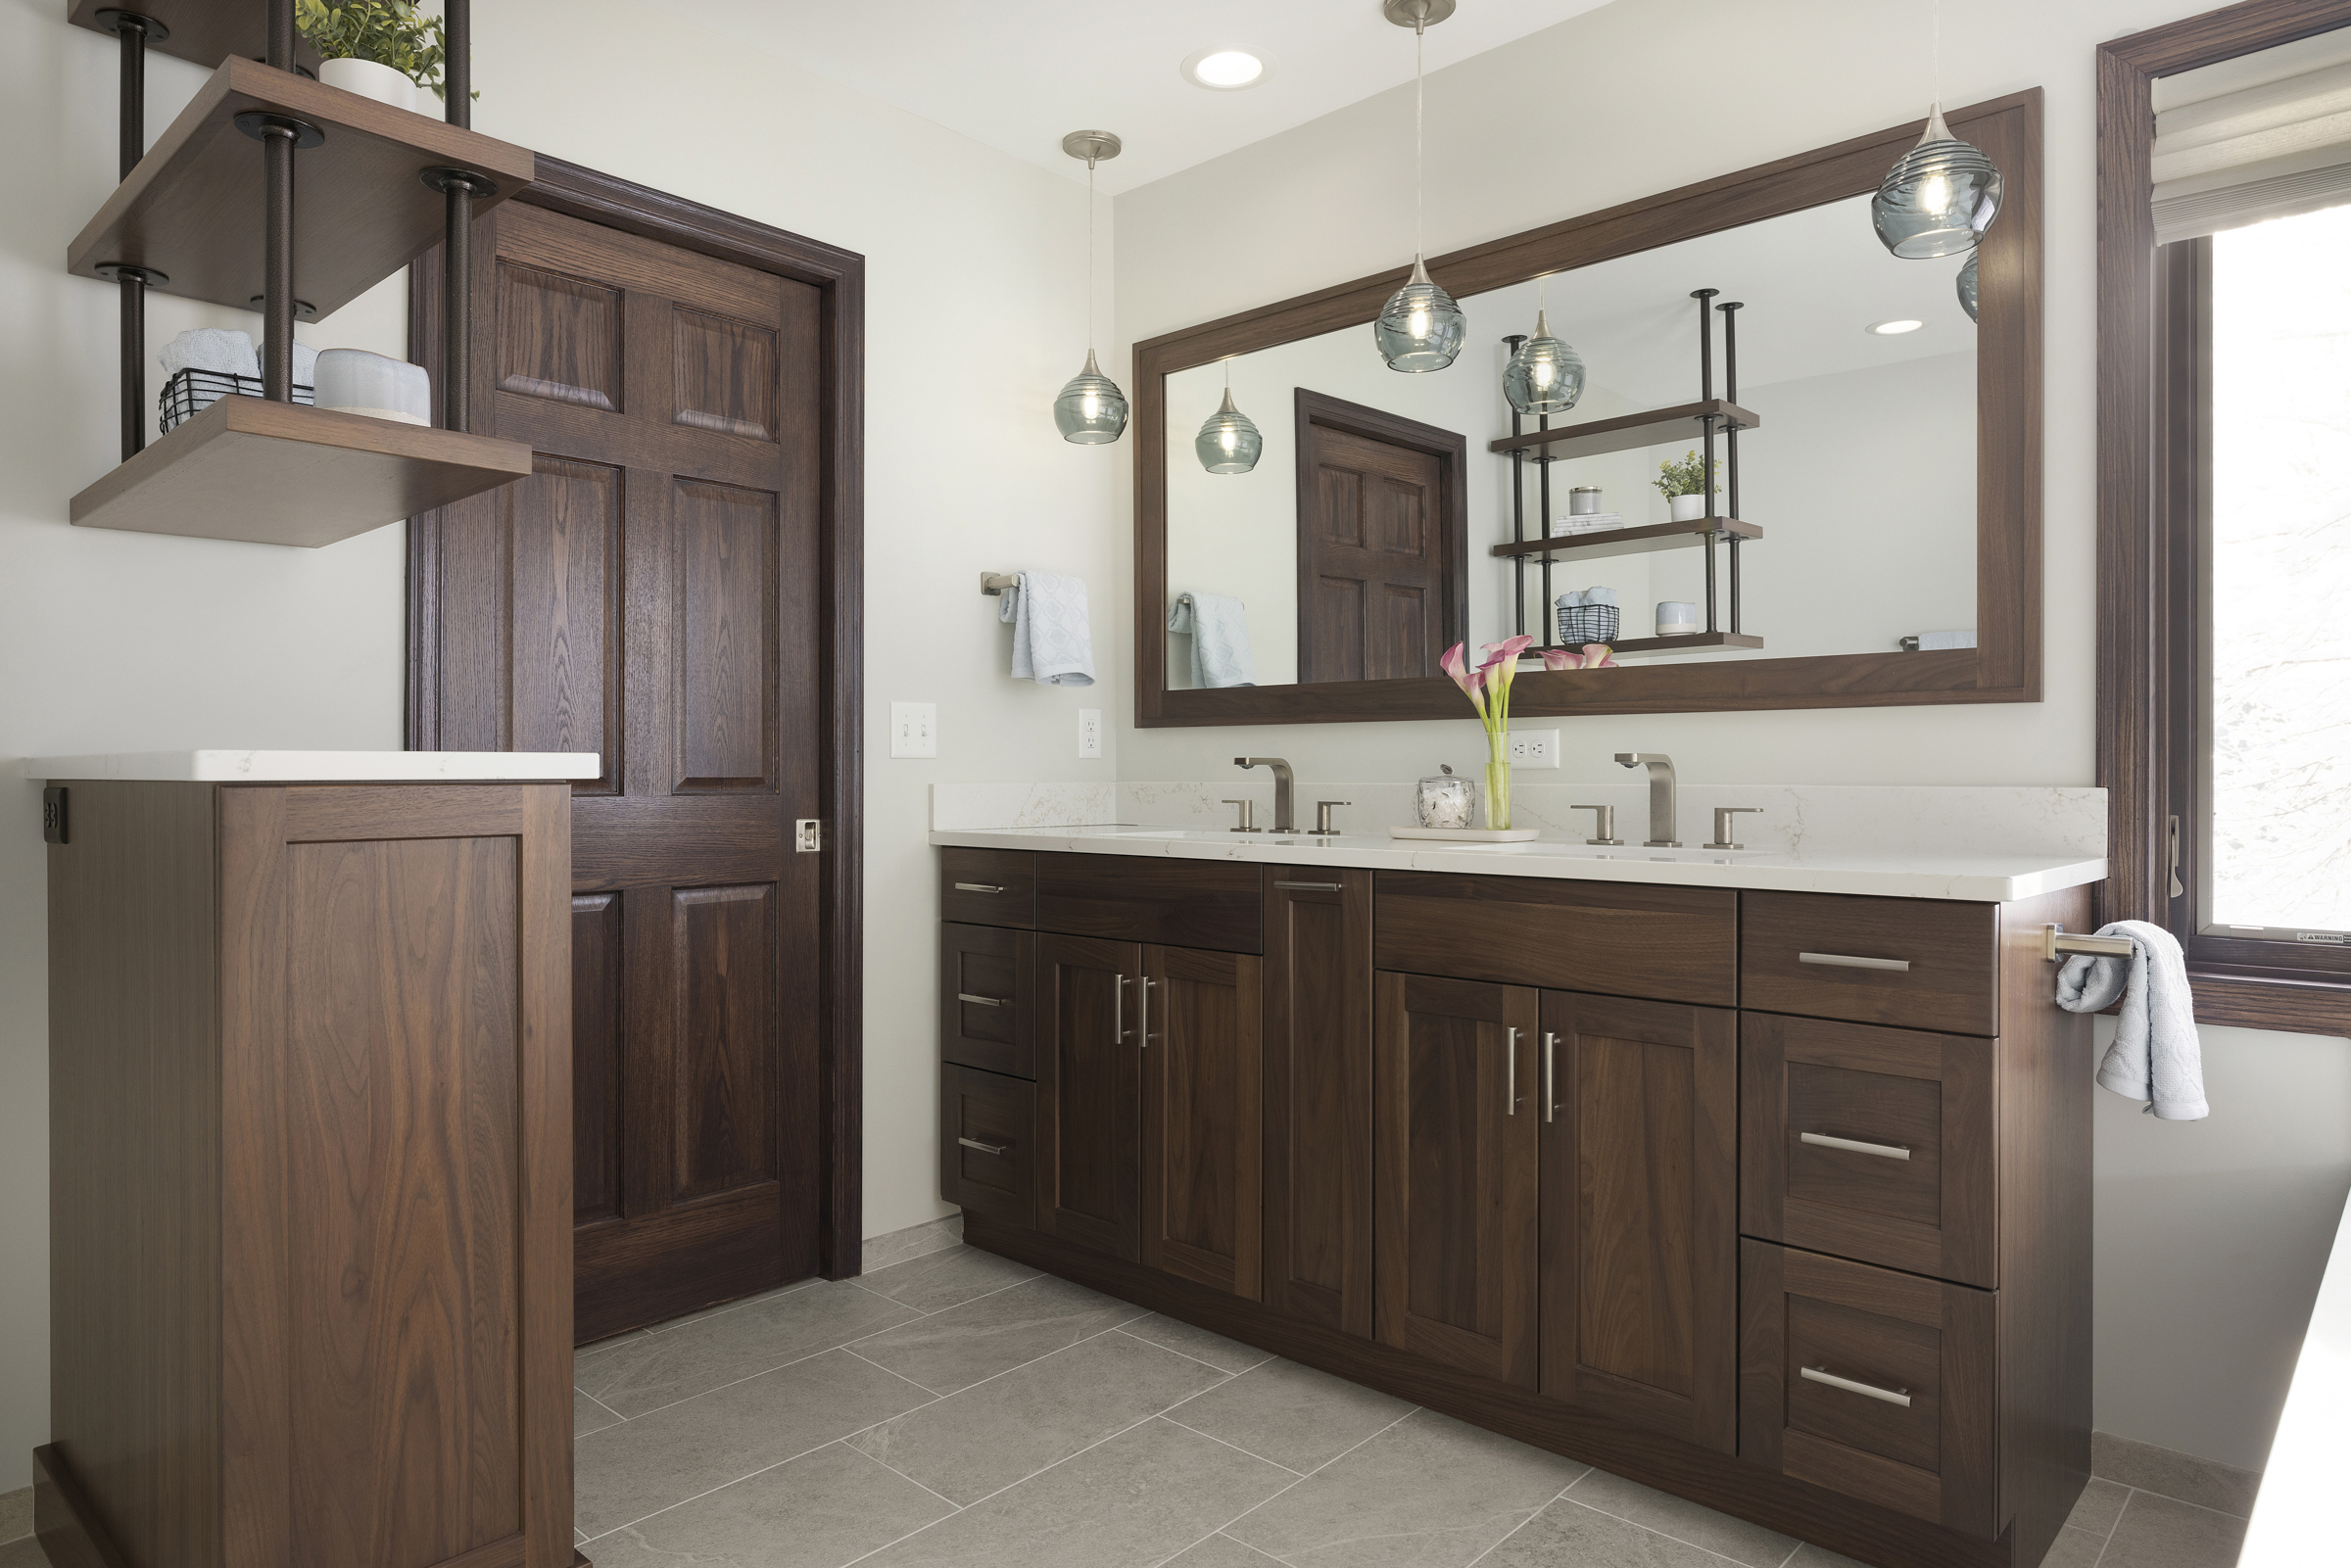 Primary bathroom remodel with dark wood cabinets and trim and hanging shelves to separate toilet area